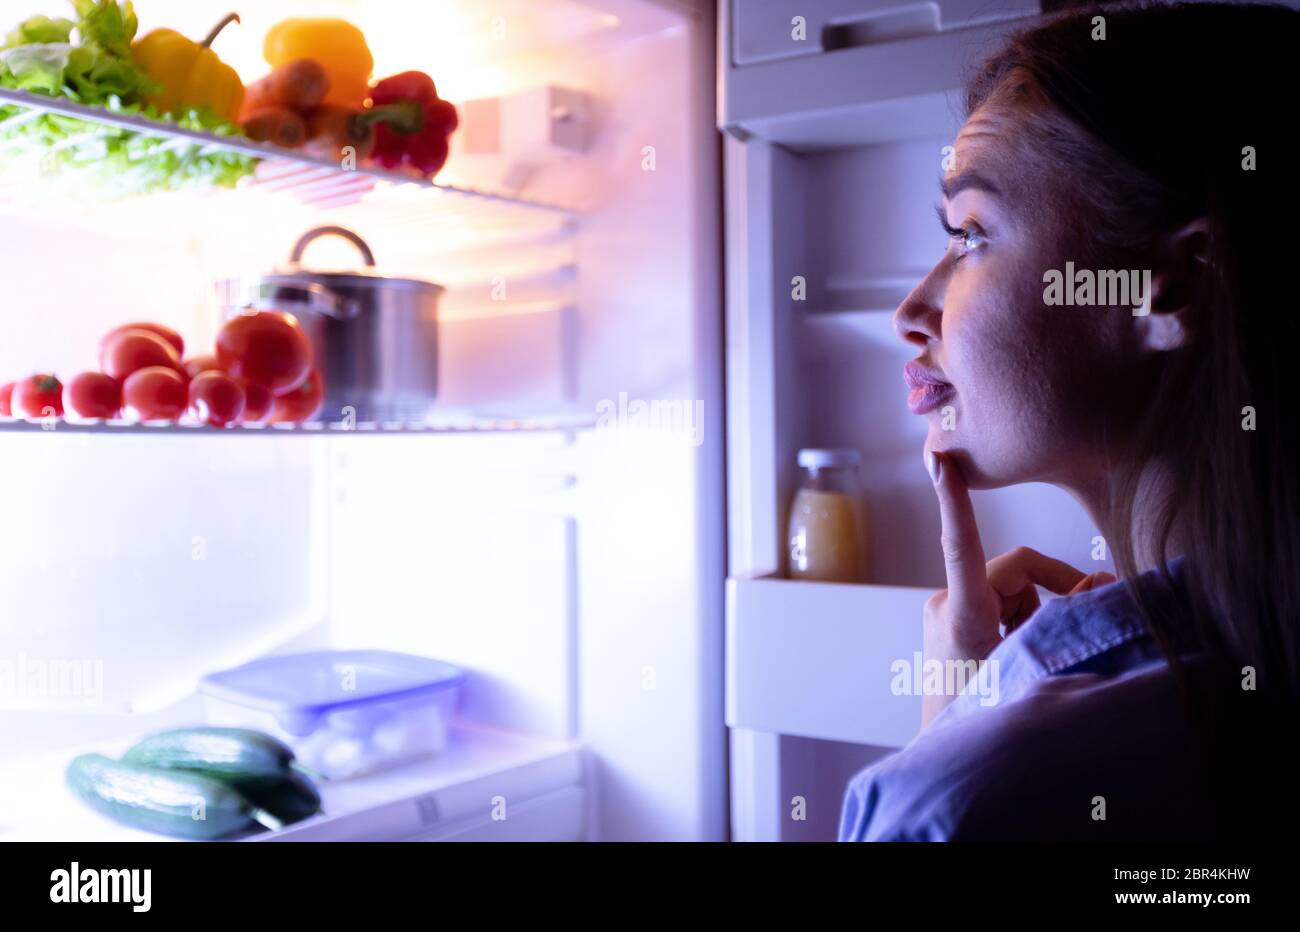 Thoughtful housewife choosing what to eat in fridge in evening Stock Photo